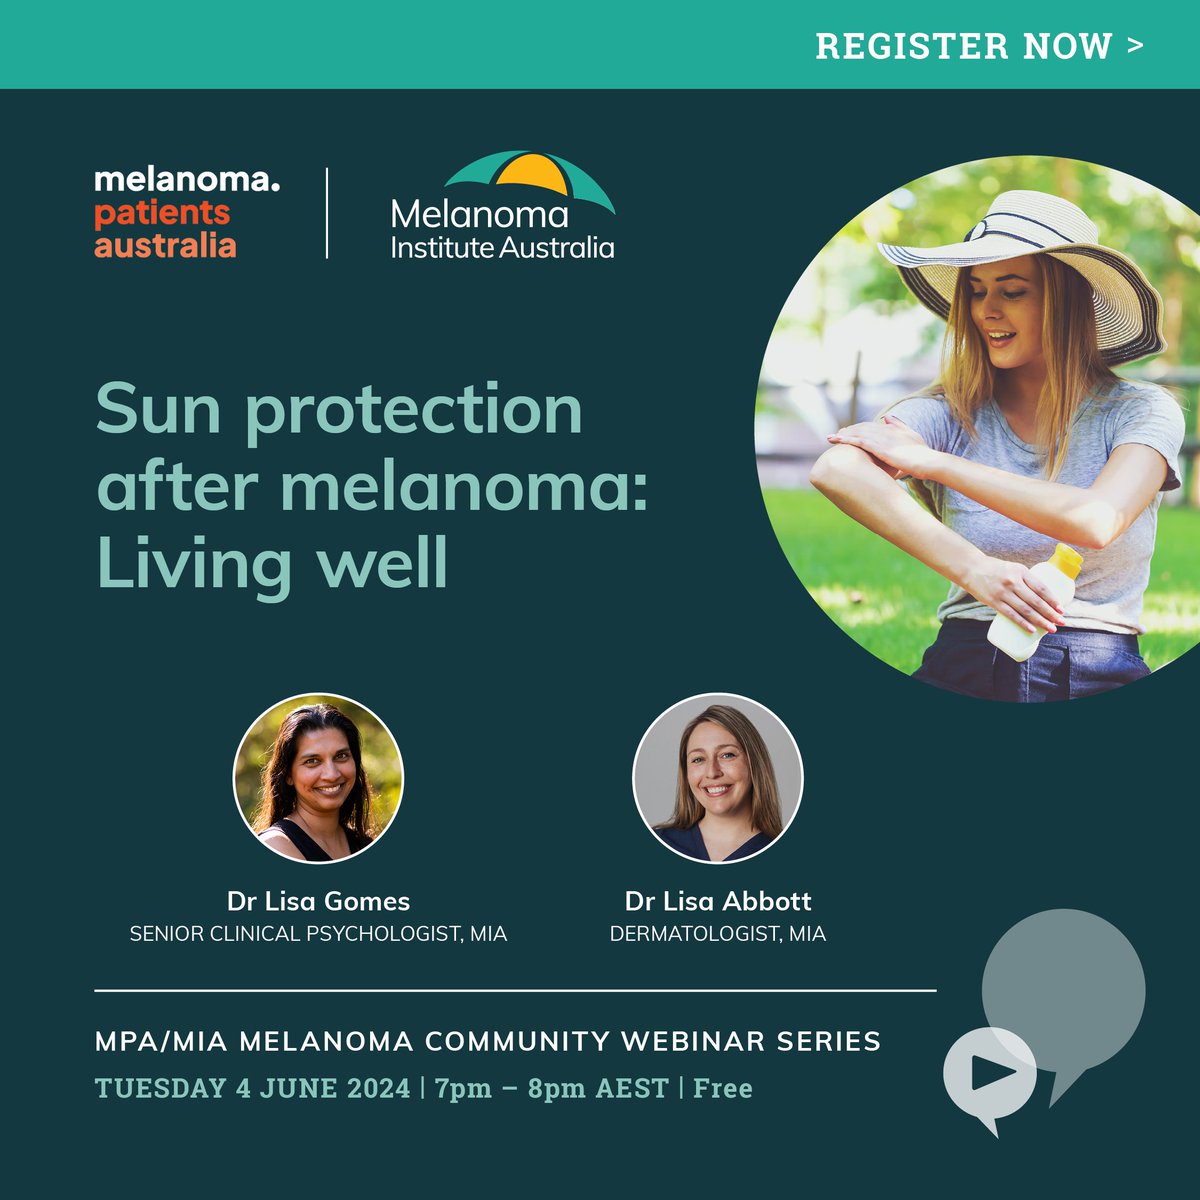 Join MIA & @melanomasupport for an informative series of free webinars for #melanoma patients & carers. Webinar 1 will discuss 'Sun protection after melanoma: Living well', followed by a Q&A. Presented by Dr Lisa Gomes & Dr Lisa Abbott. Register > melanoma.org.au/event/mpa-mia-… #Webinar